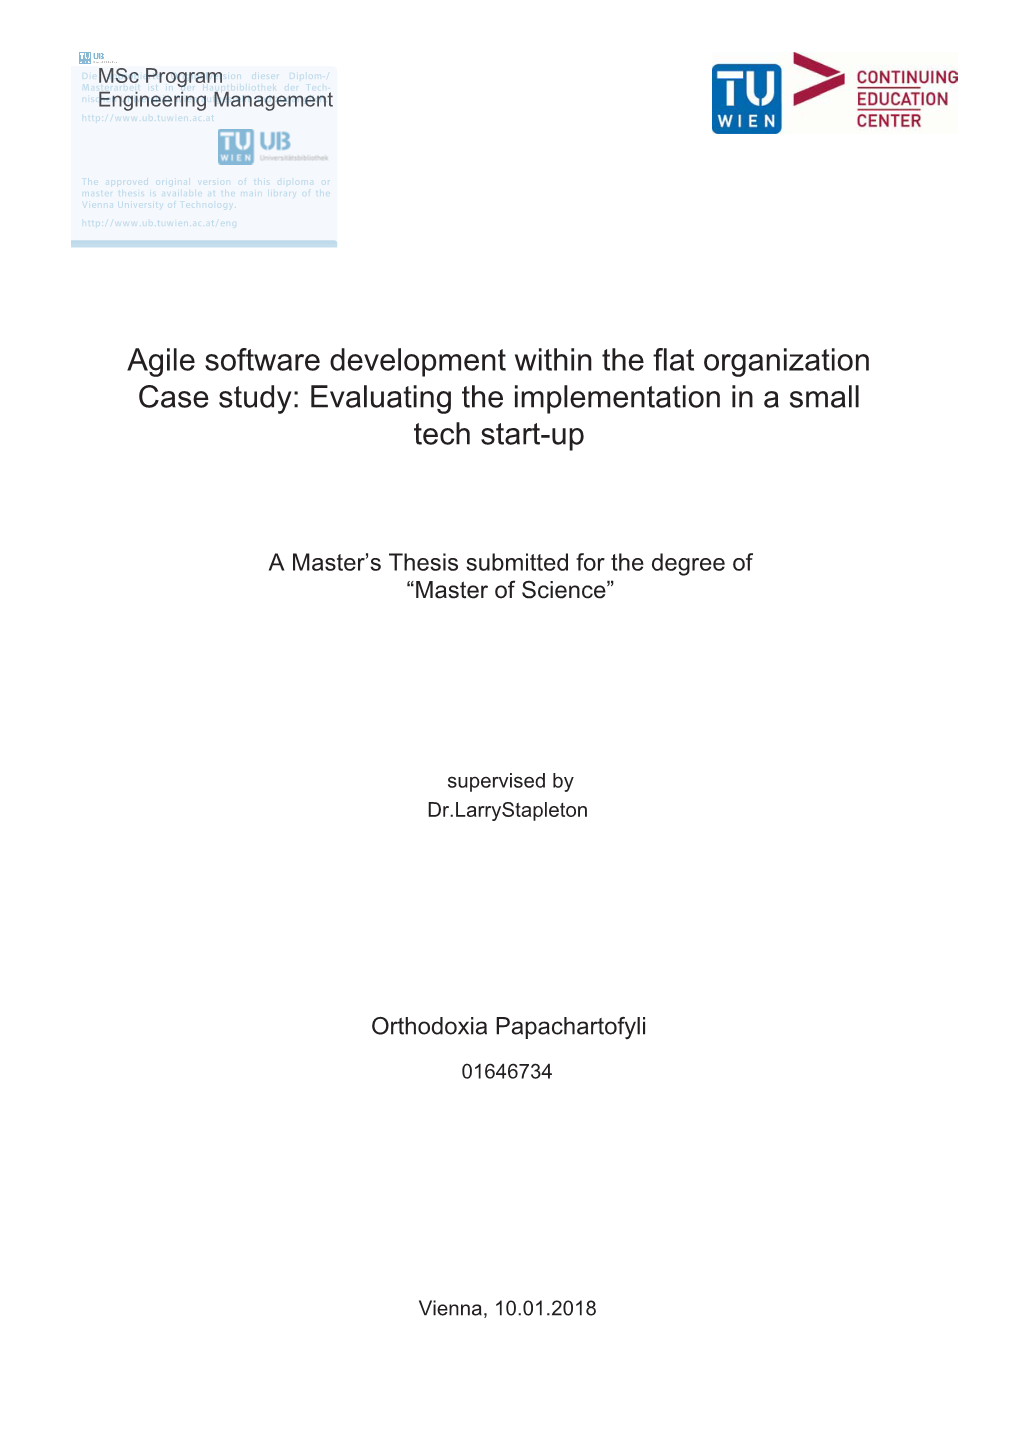 Agile Software Development Within the Flat Organization Case Study: Evaluating the Implementation in a Small Tech Start-Up